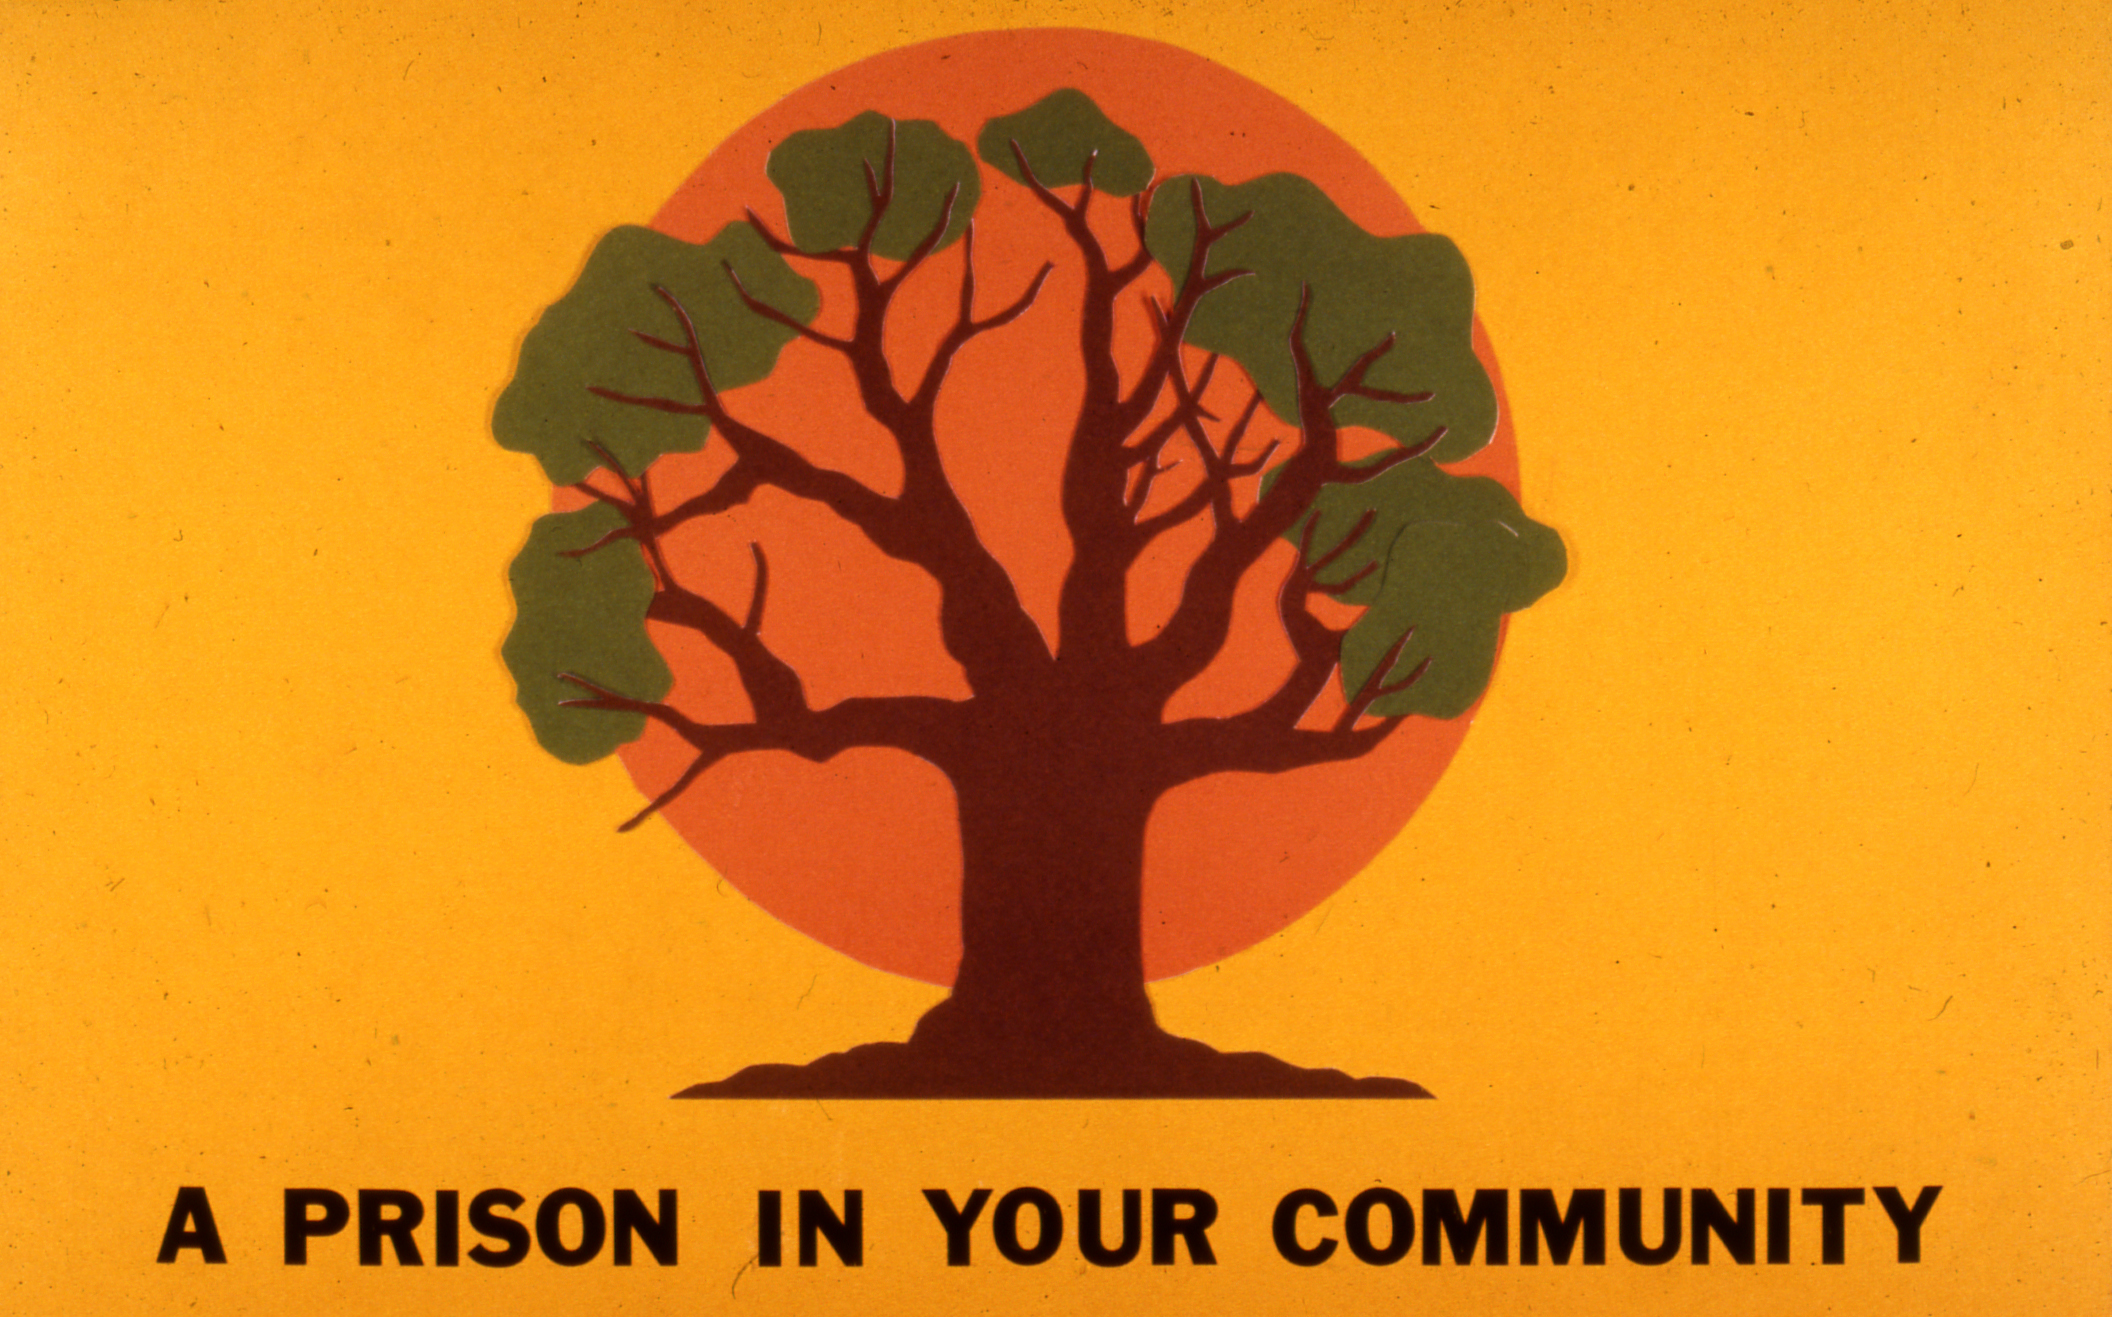 Slide 3: This is one of the strangest pictures ever. It is a graphic created by the Florida Department of Corrections and was made with construction paper. It shows a live oak tree in front of a setting sun, on a dark orange background. Beneath the sun and tree are the words in all caps, A PRISON IN YOUR COMMUNITY